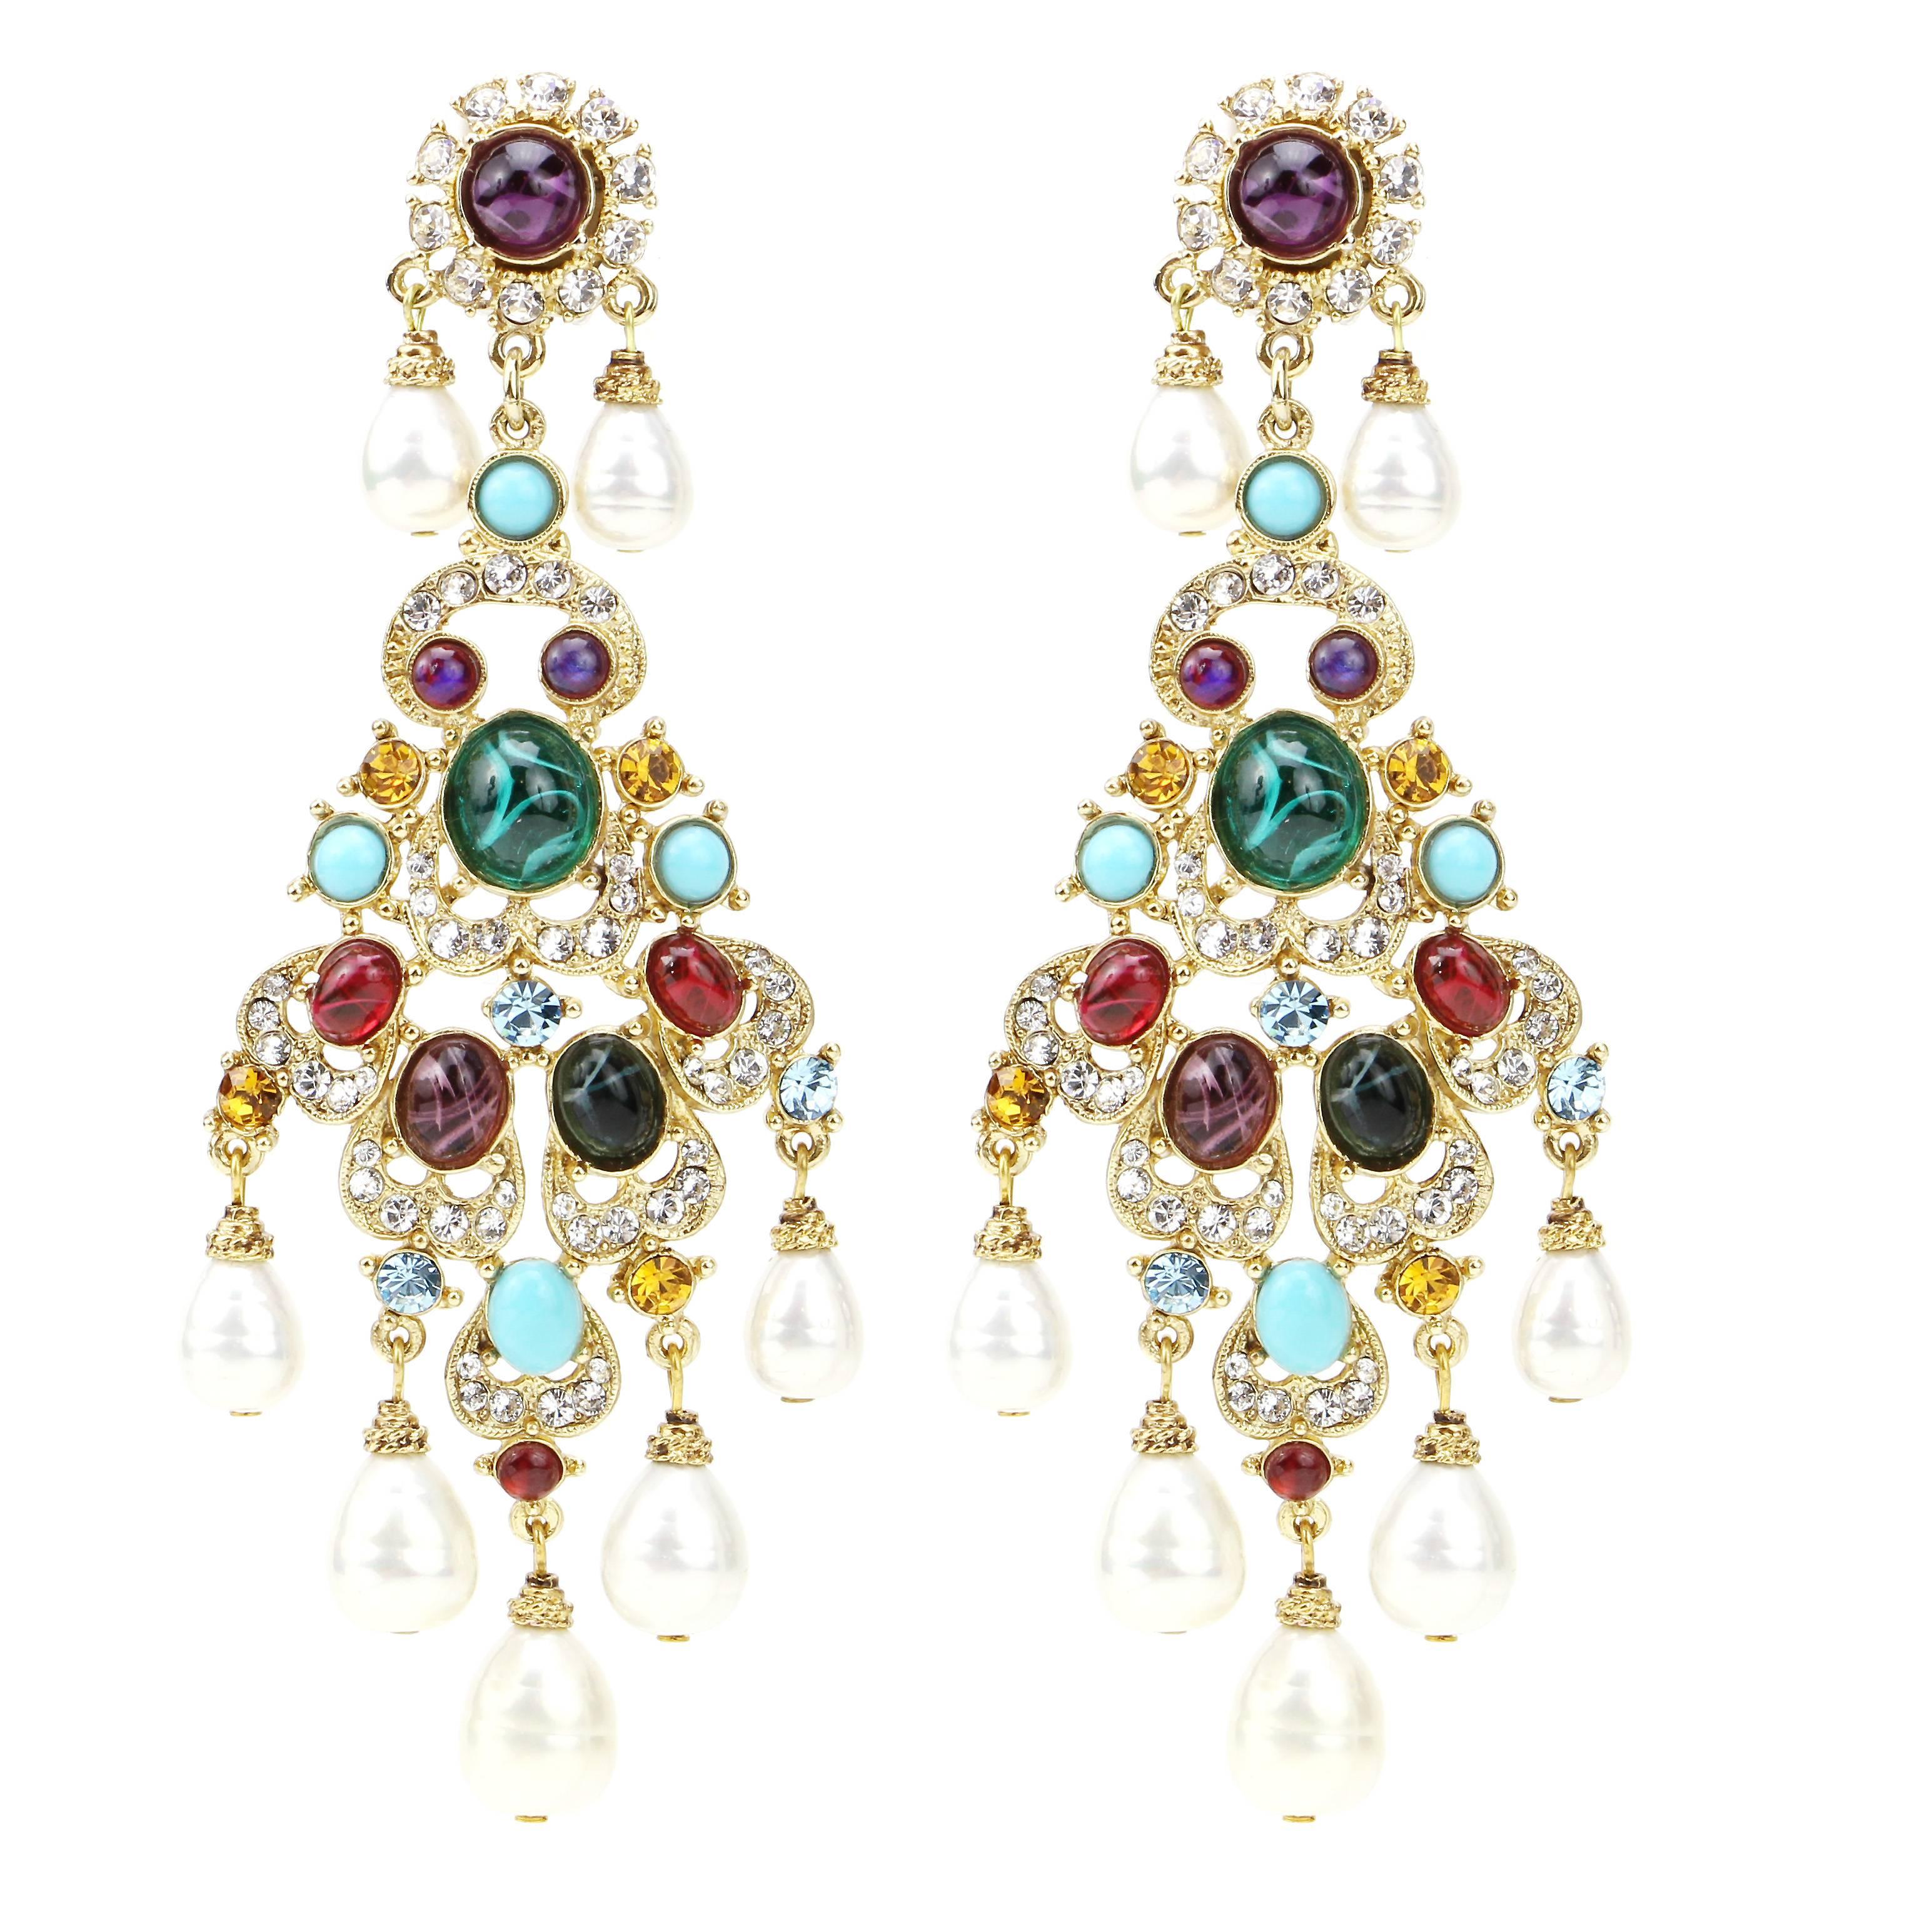 Dramatic Chandelier Earrings with Pate de Verre stones and white Pearls.
Gold plated.Post backing.